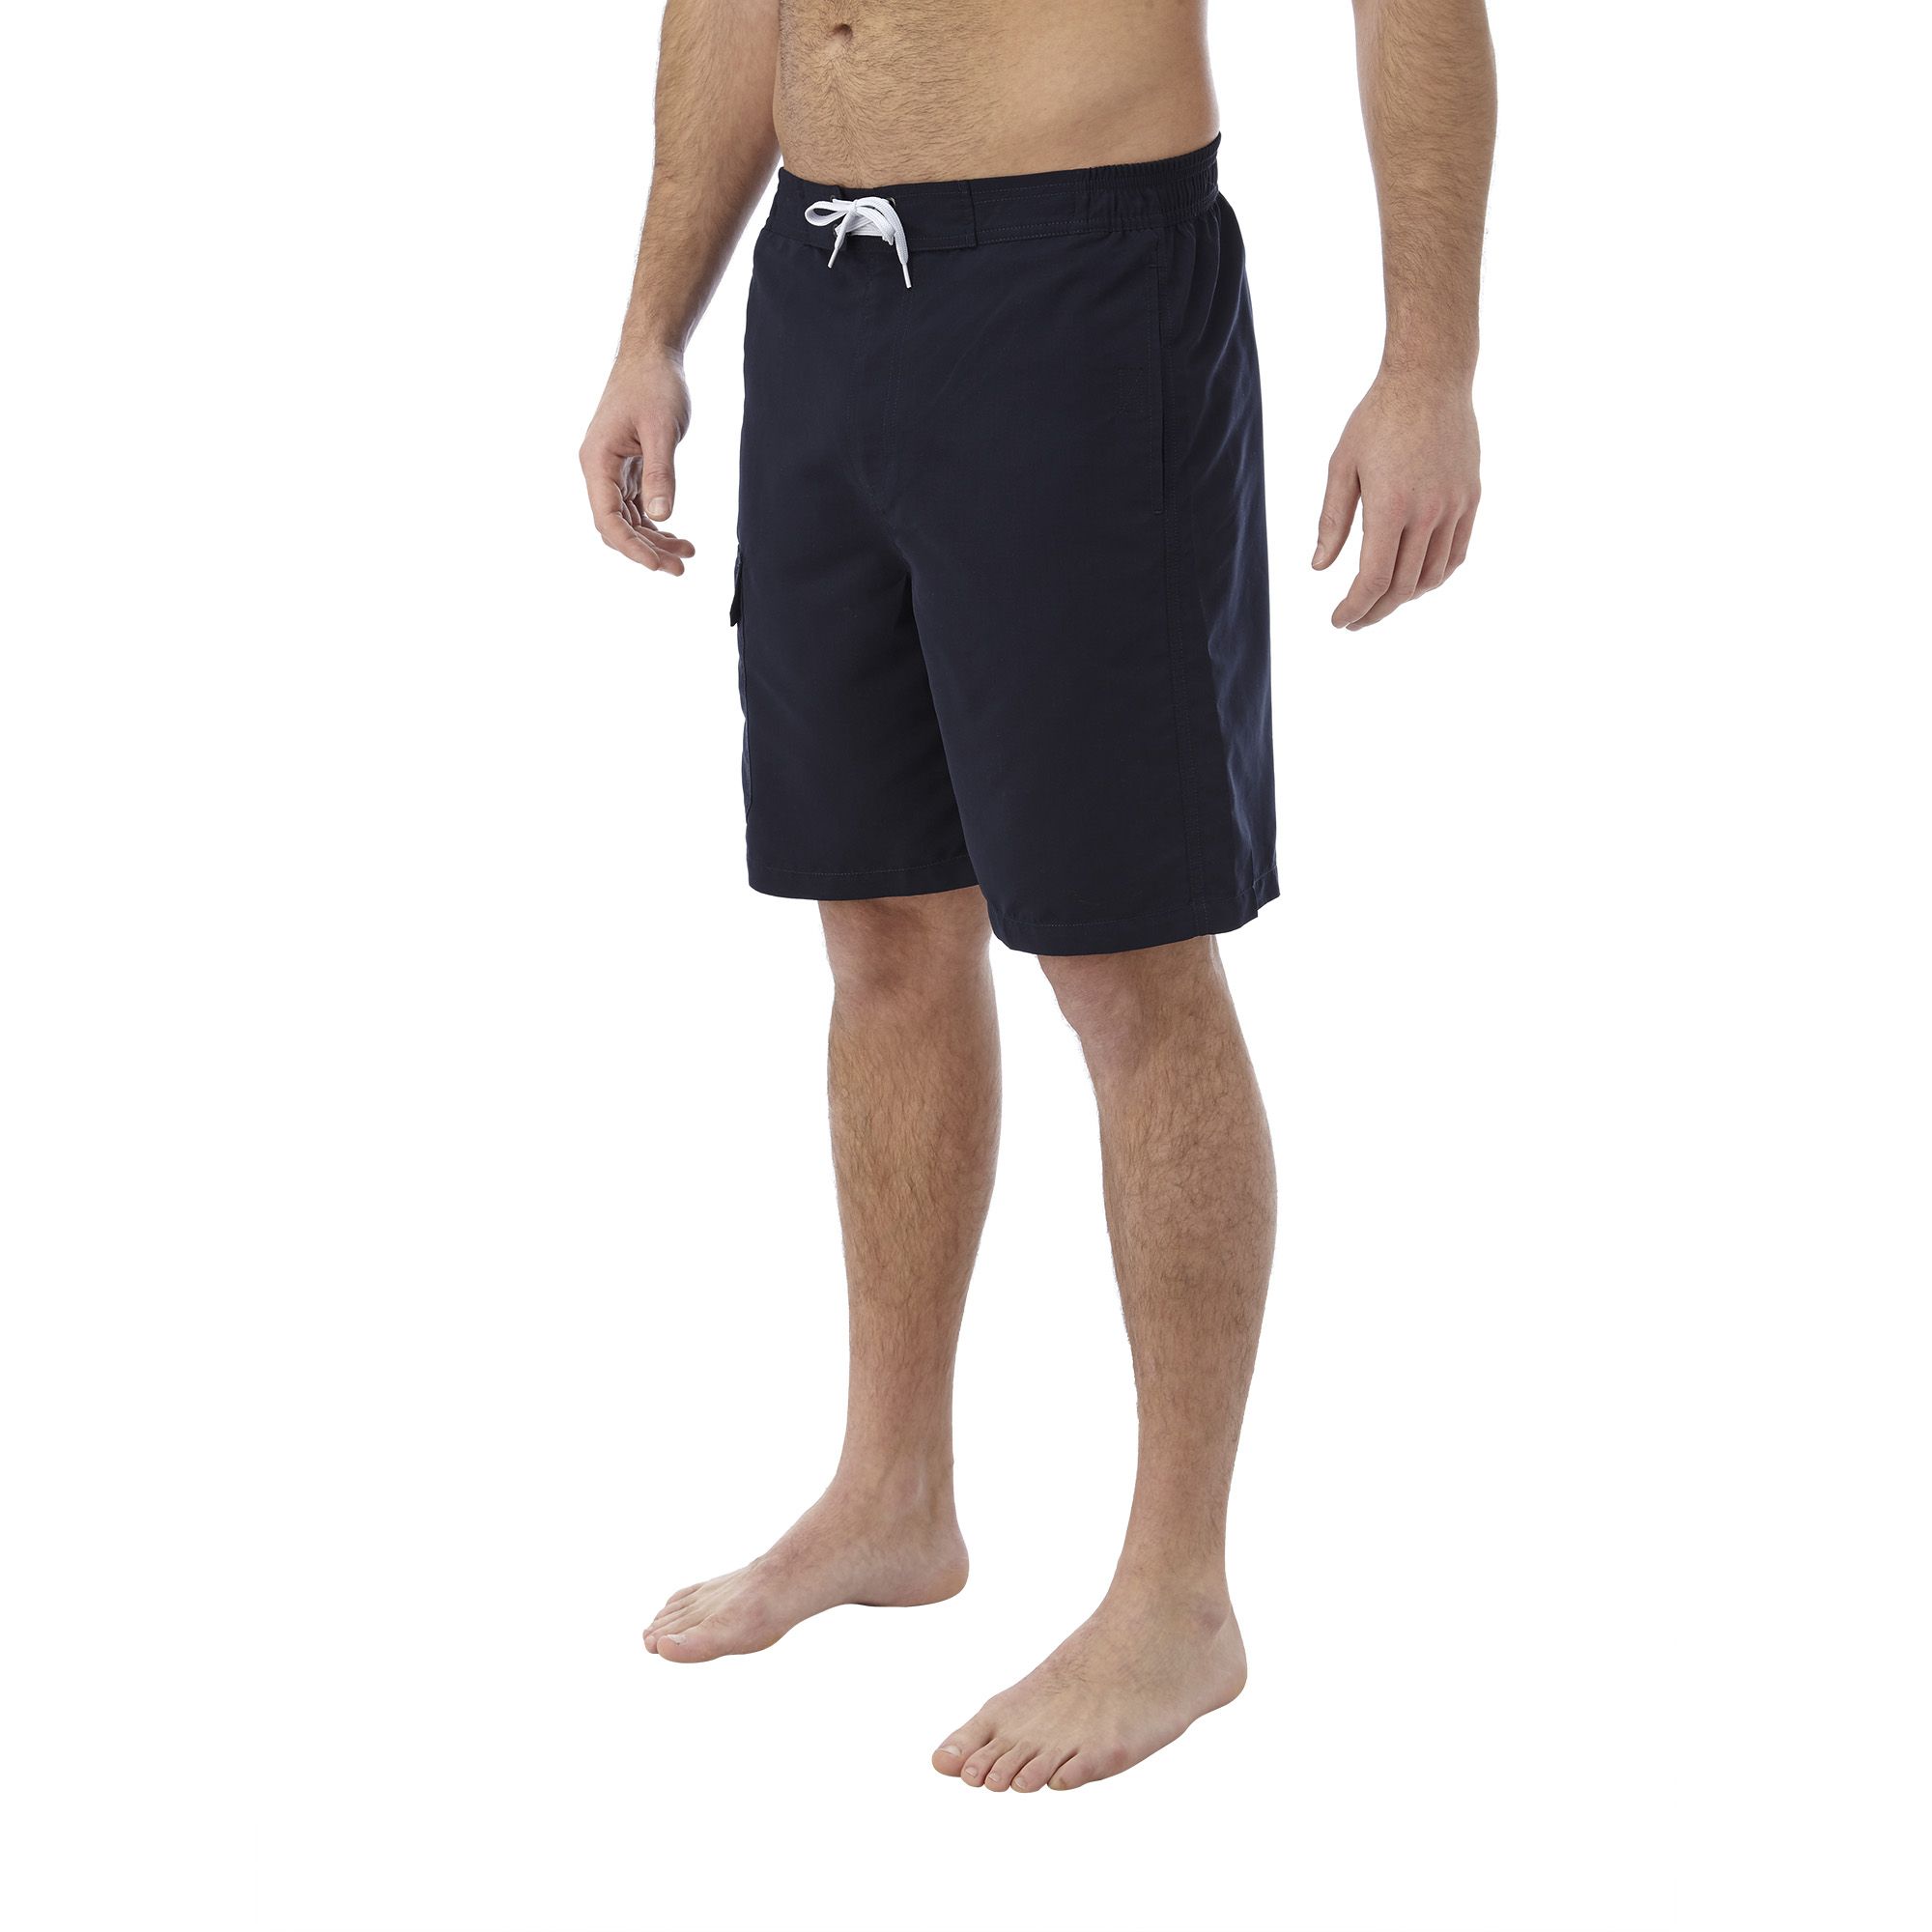 Our classic board shorts in plain colours inspired by the cliffs and seascapes of the Yorkshire coastline. These versatile mens swimming shorts with an inner mesh brief are  perfect for holidays. You can go for an early morning dip, and they’ll be dry in time to wear as a pair of shorts to breakfast. The semi-elasticated waist is really comfortable to wear all day. Just throw on a T-shirt and you’ll be ready for a day of lounging around by the pool, seeing the sights or even out for dinner. Cut from a quick-drying high performance fabric that repels water, they don’t weigh you down when you swim and the patch pocket has a neat eyelet drainage hole at the bottom to let water out. Surfer styling includes a drawcord detail at the waist, mesh-lined side pockets, hidden back pocket and a woven TOG24 label on the leg pocket.